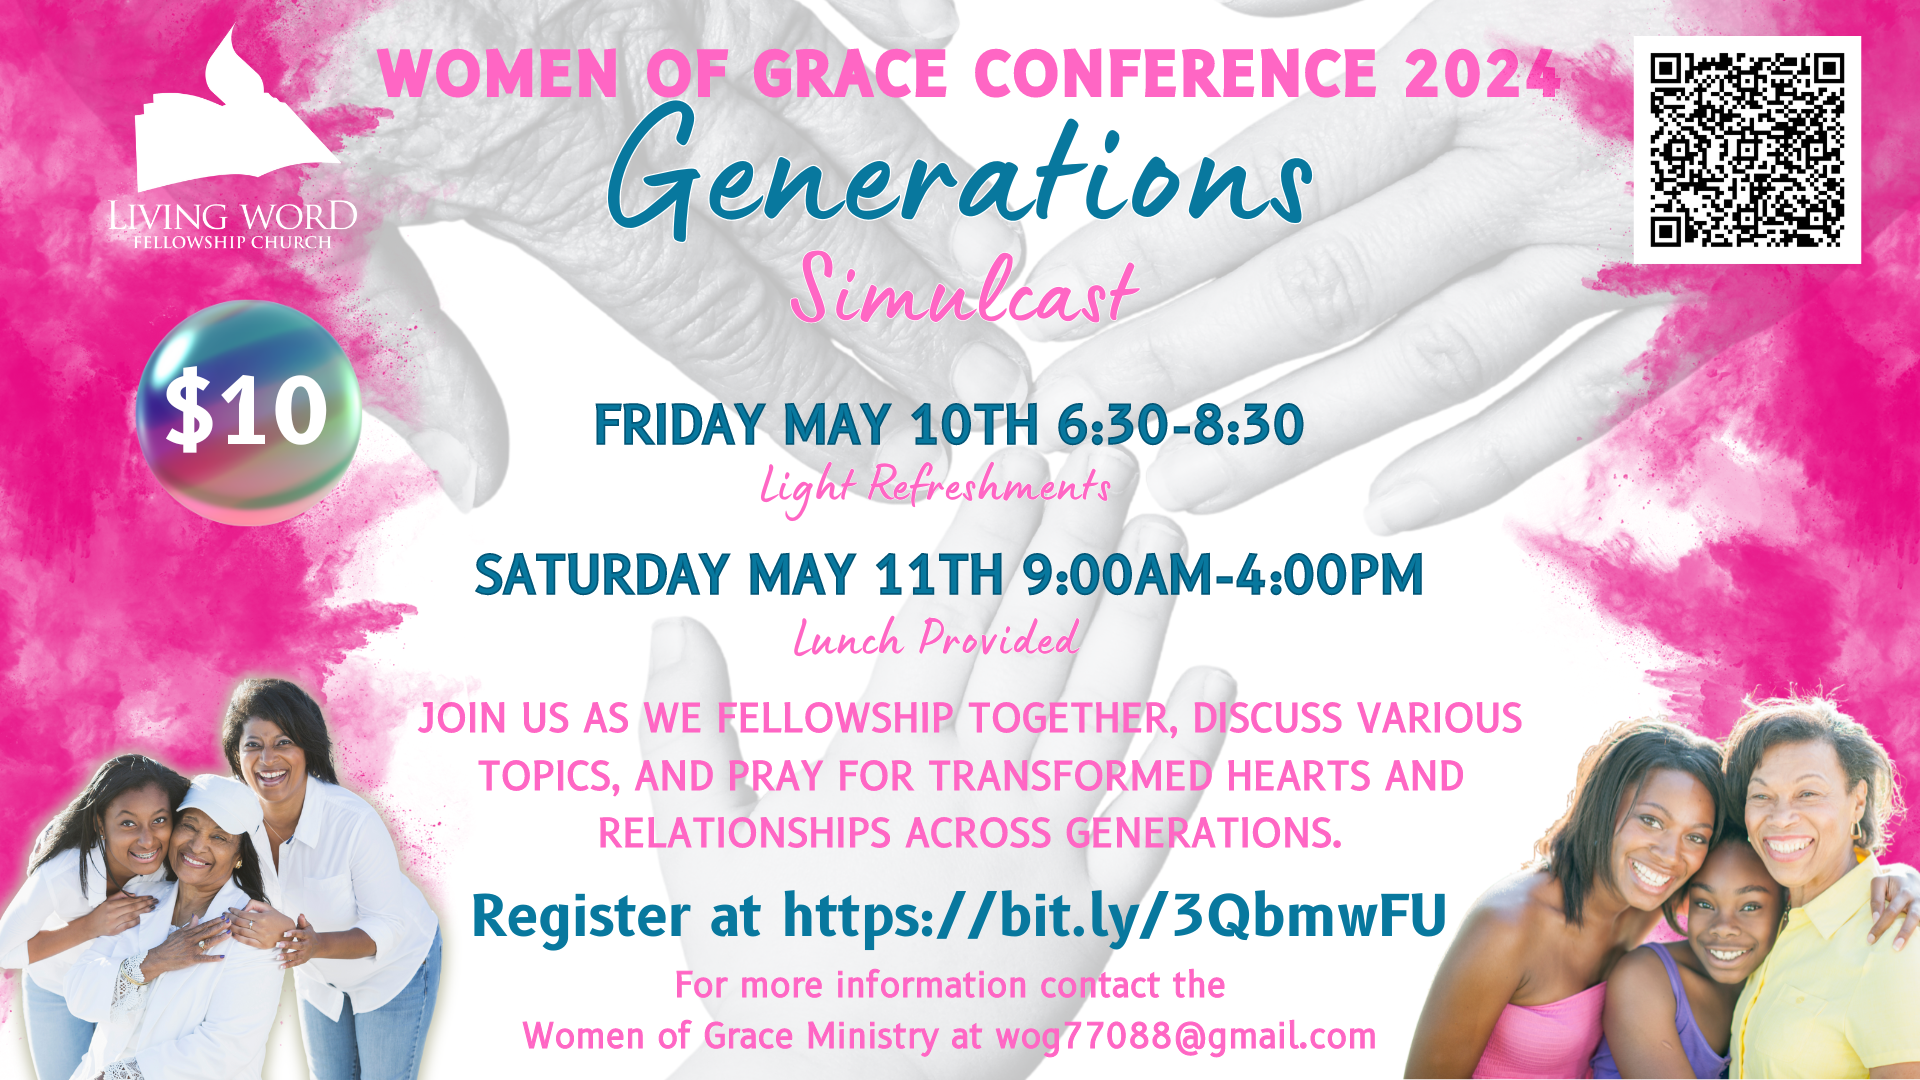 Women’s Generations Conference head image